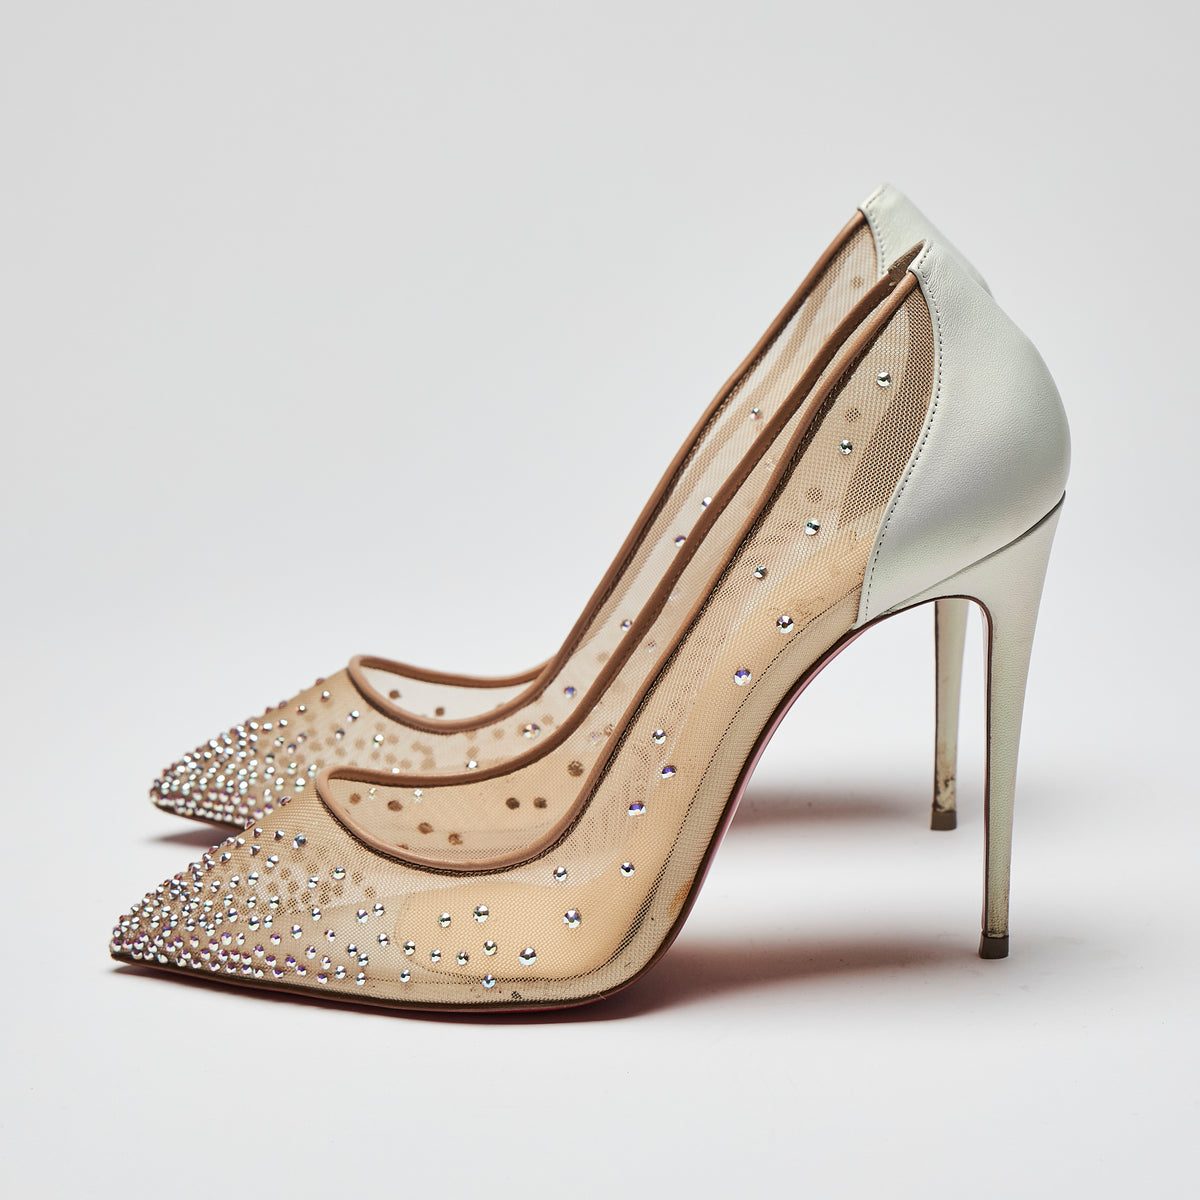 Pre-Loved White Satin Point Toe Heels with Beige Mesh and Crystal Embellishment.(side)